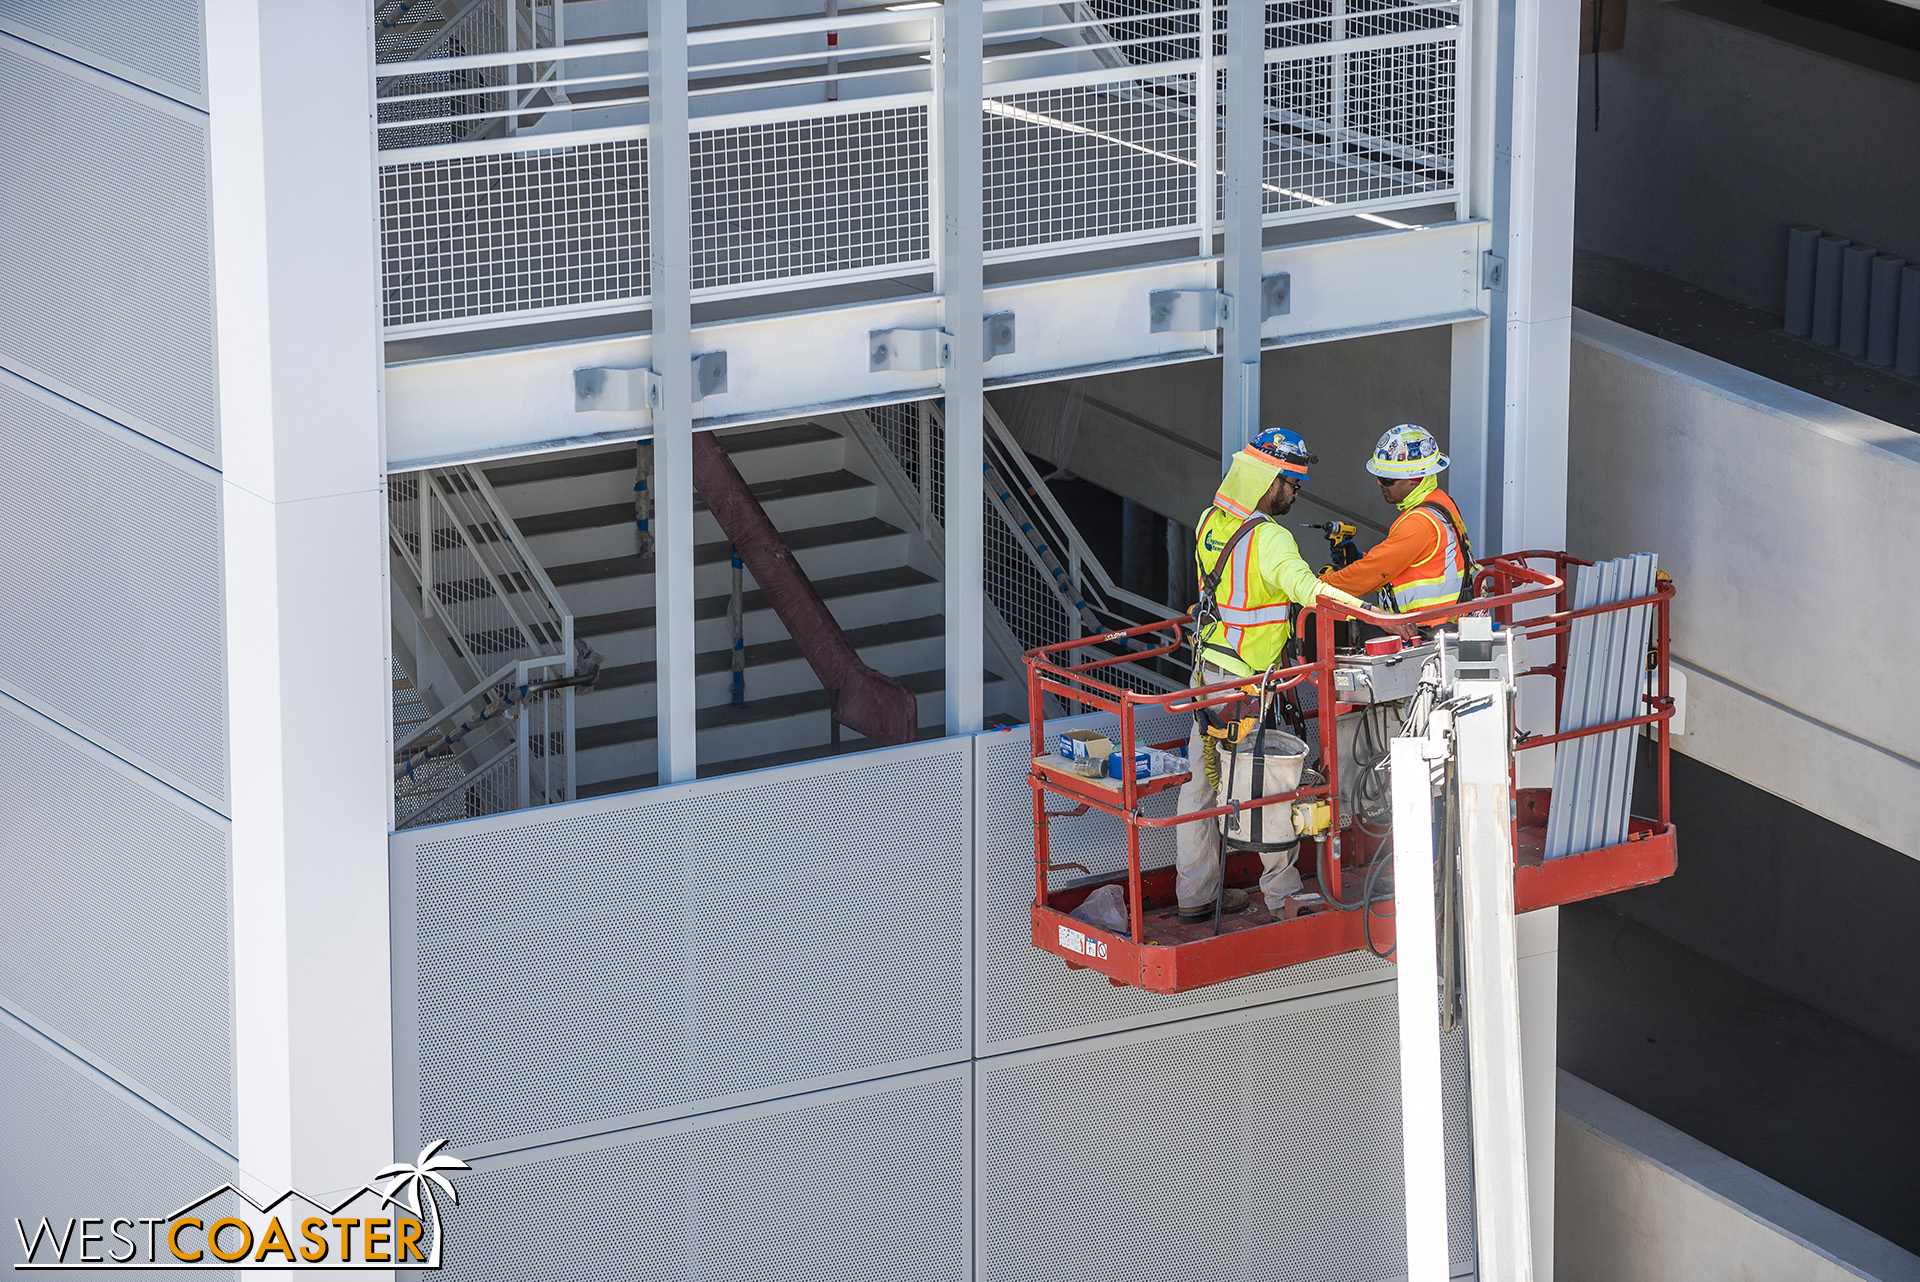  Crews were working on installing perforated screens, though! 